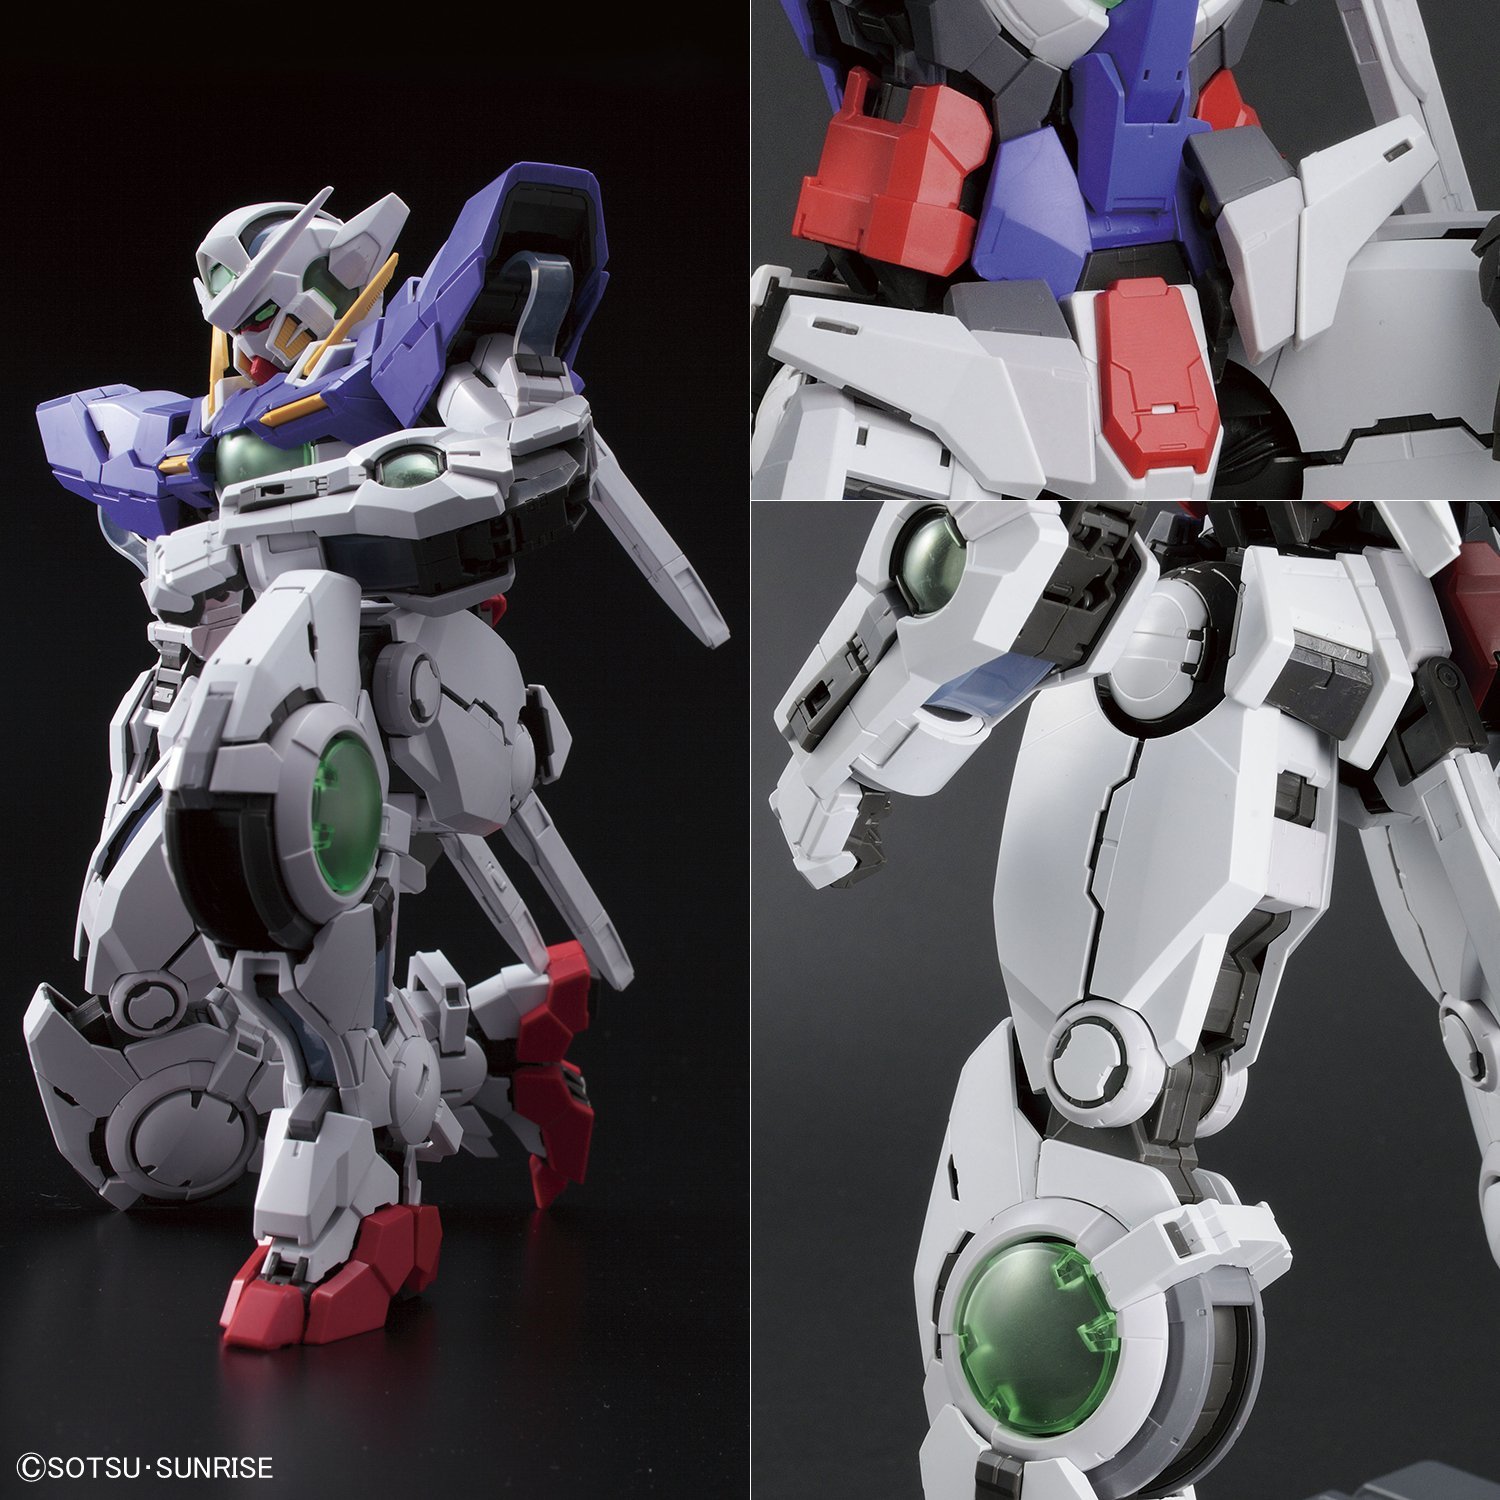 Bandai 1/60 PG exia picture 8 - articulation express [00 10 anniversary]